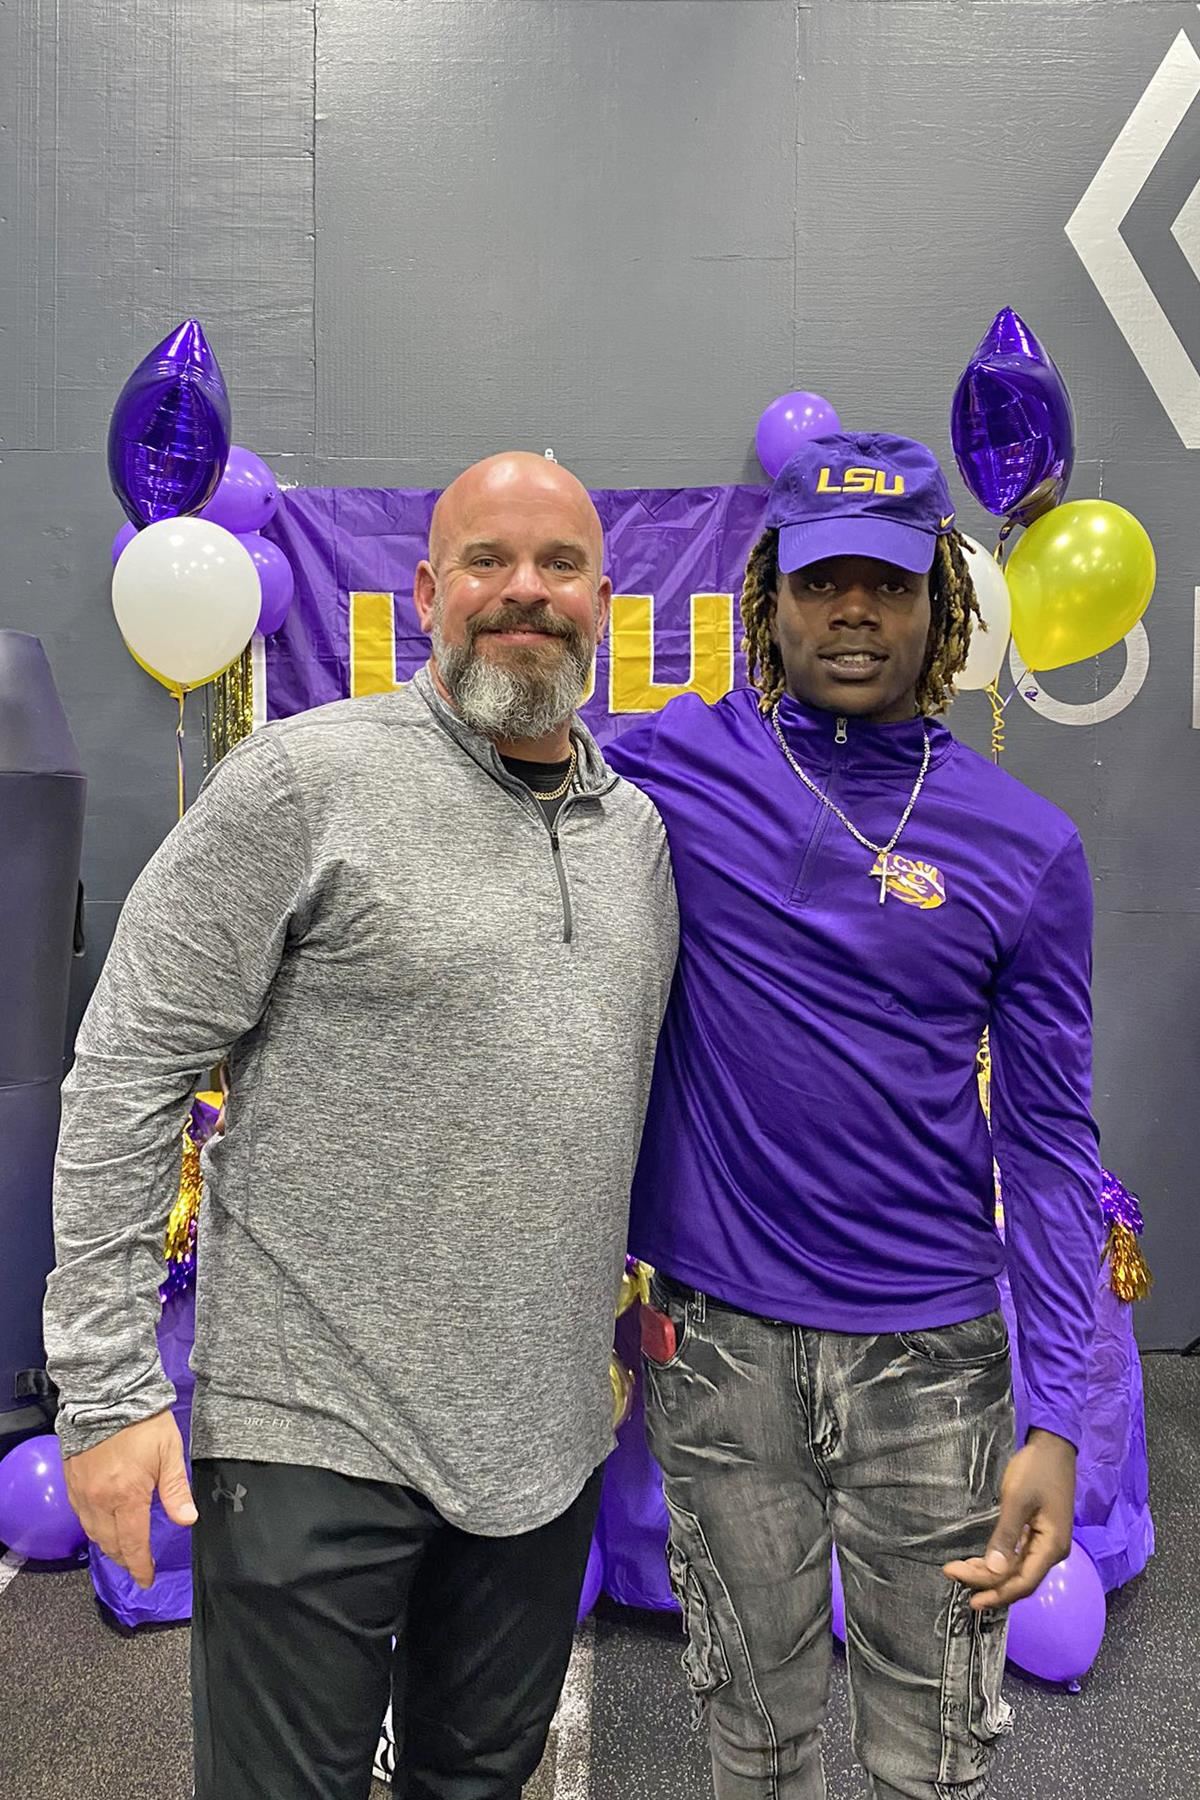 Cypress Ranch High School senior Christian Brathwaite, right, signed a letter of intent to Louisiana State University.